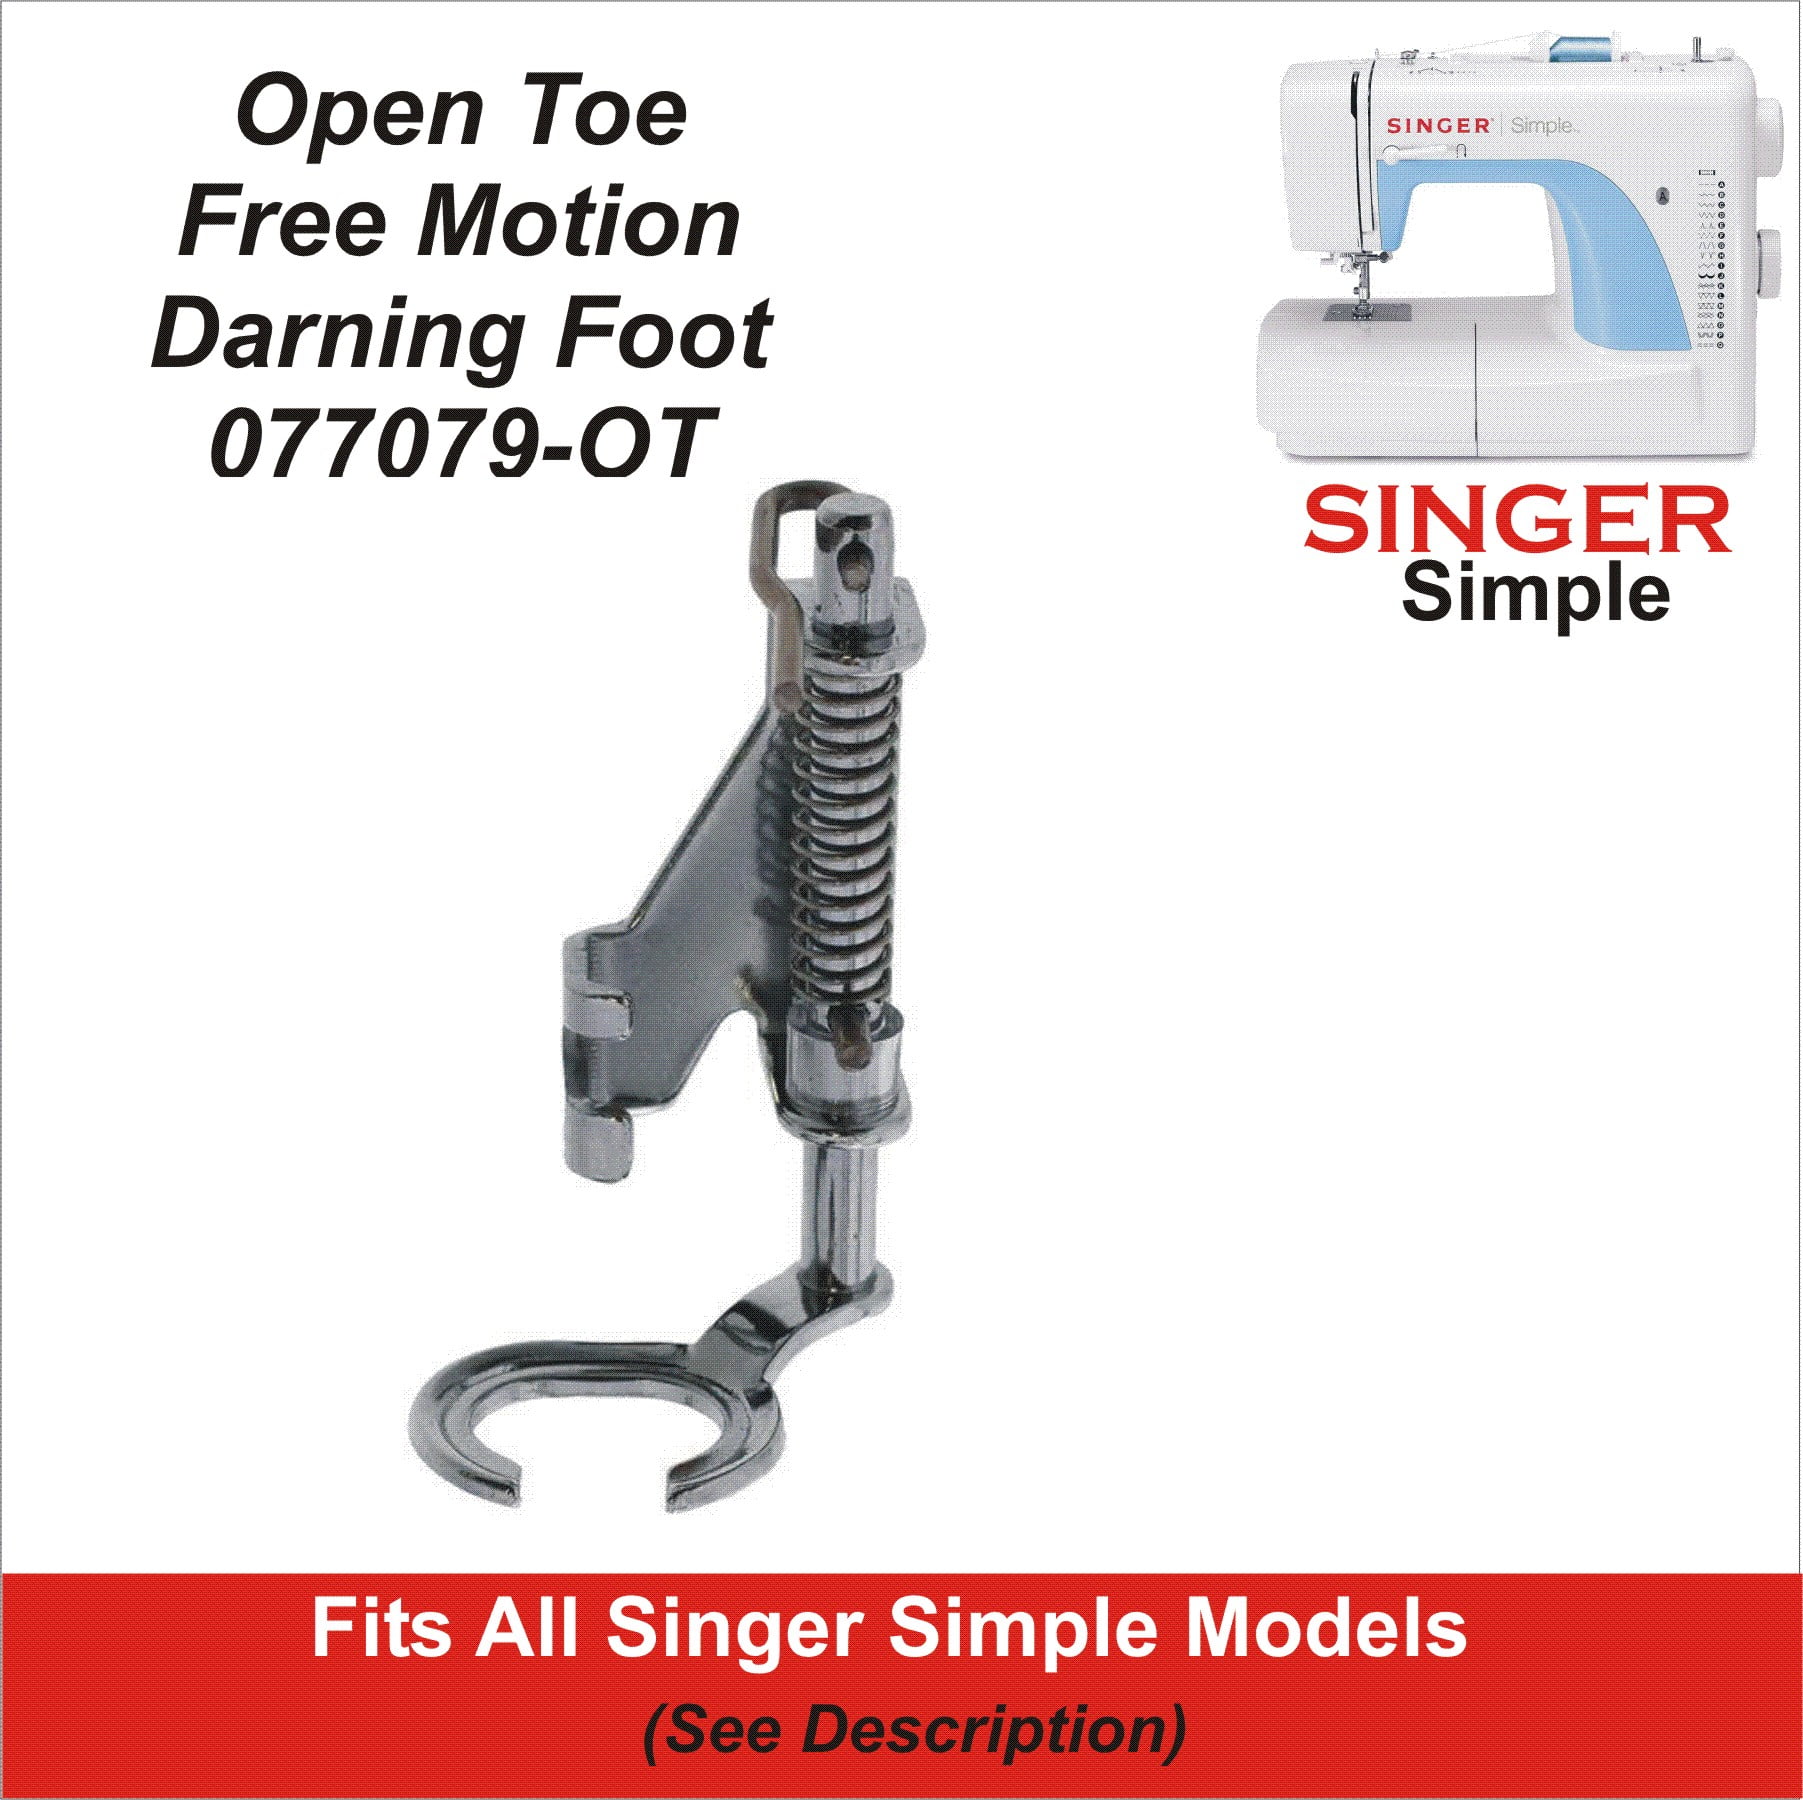 Embroidery Darning Foot Singer 7424,7426,7442,7444,7446,7462,7464,7466,7468 CE 